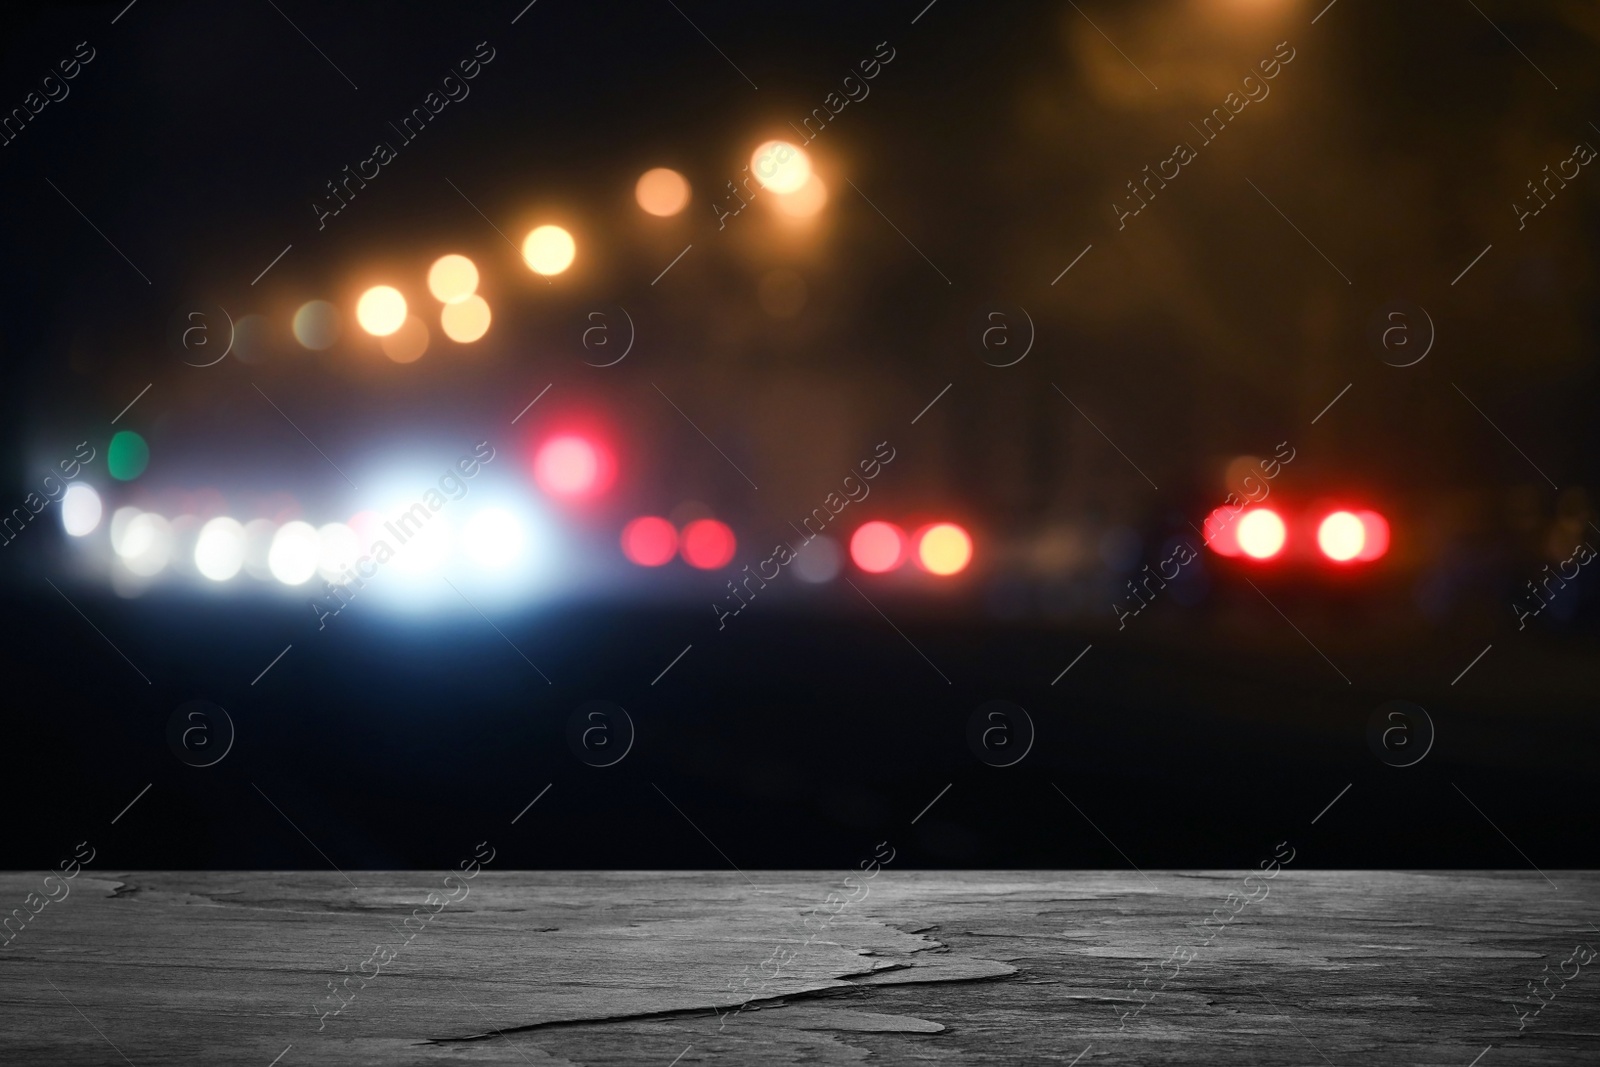 Image of Empty black stone surface and blurred view of night city. Bokeh effect 